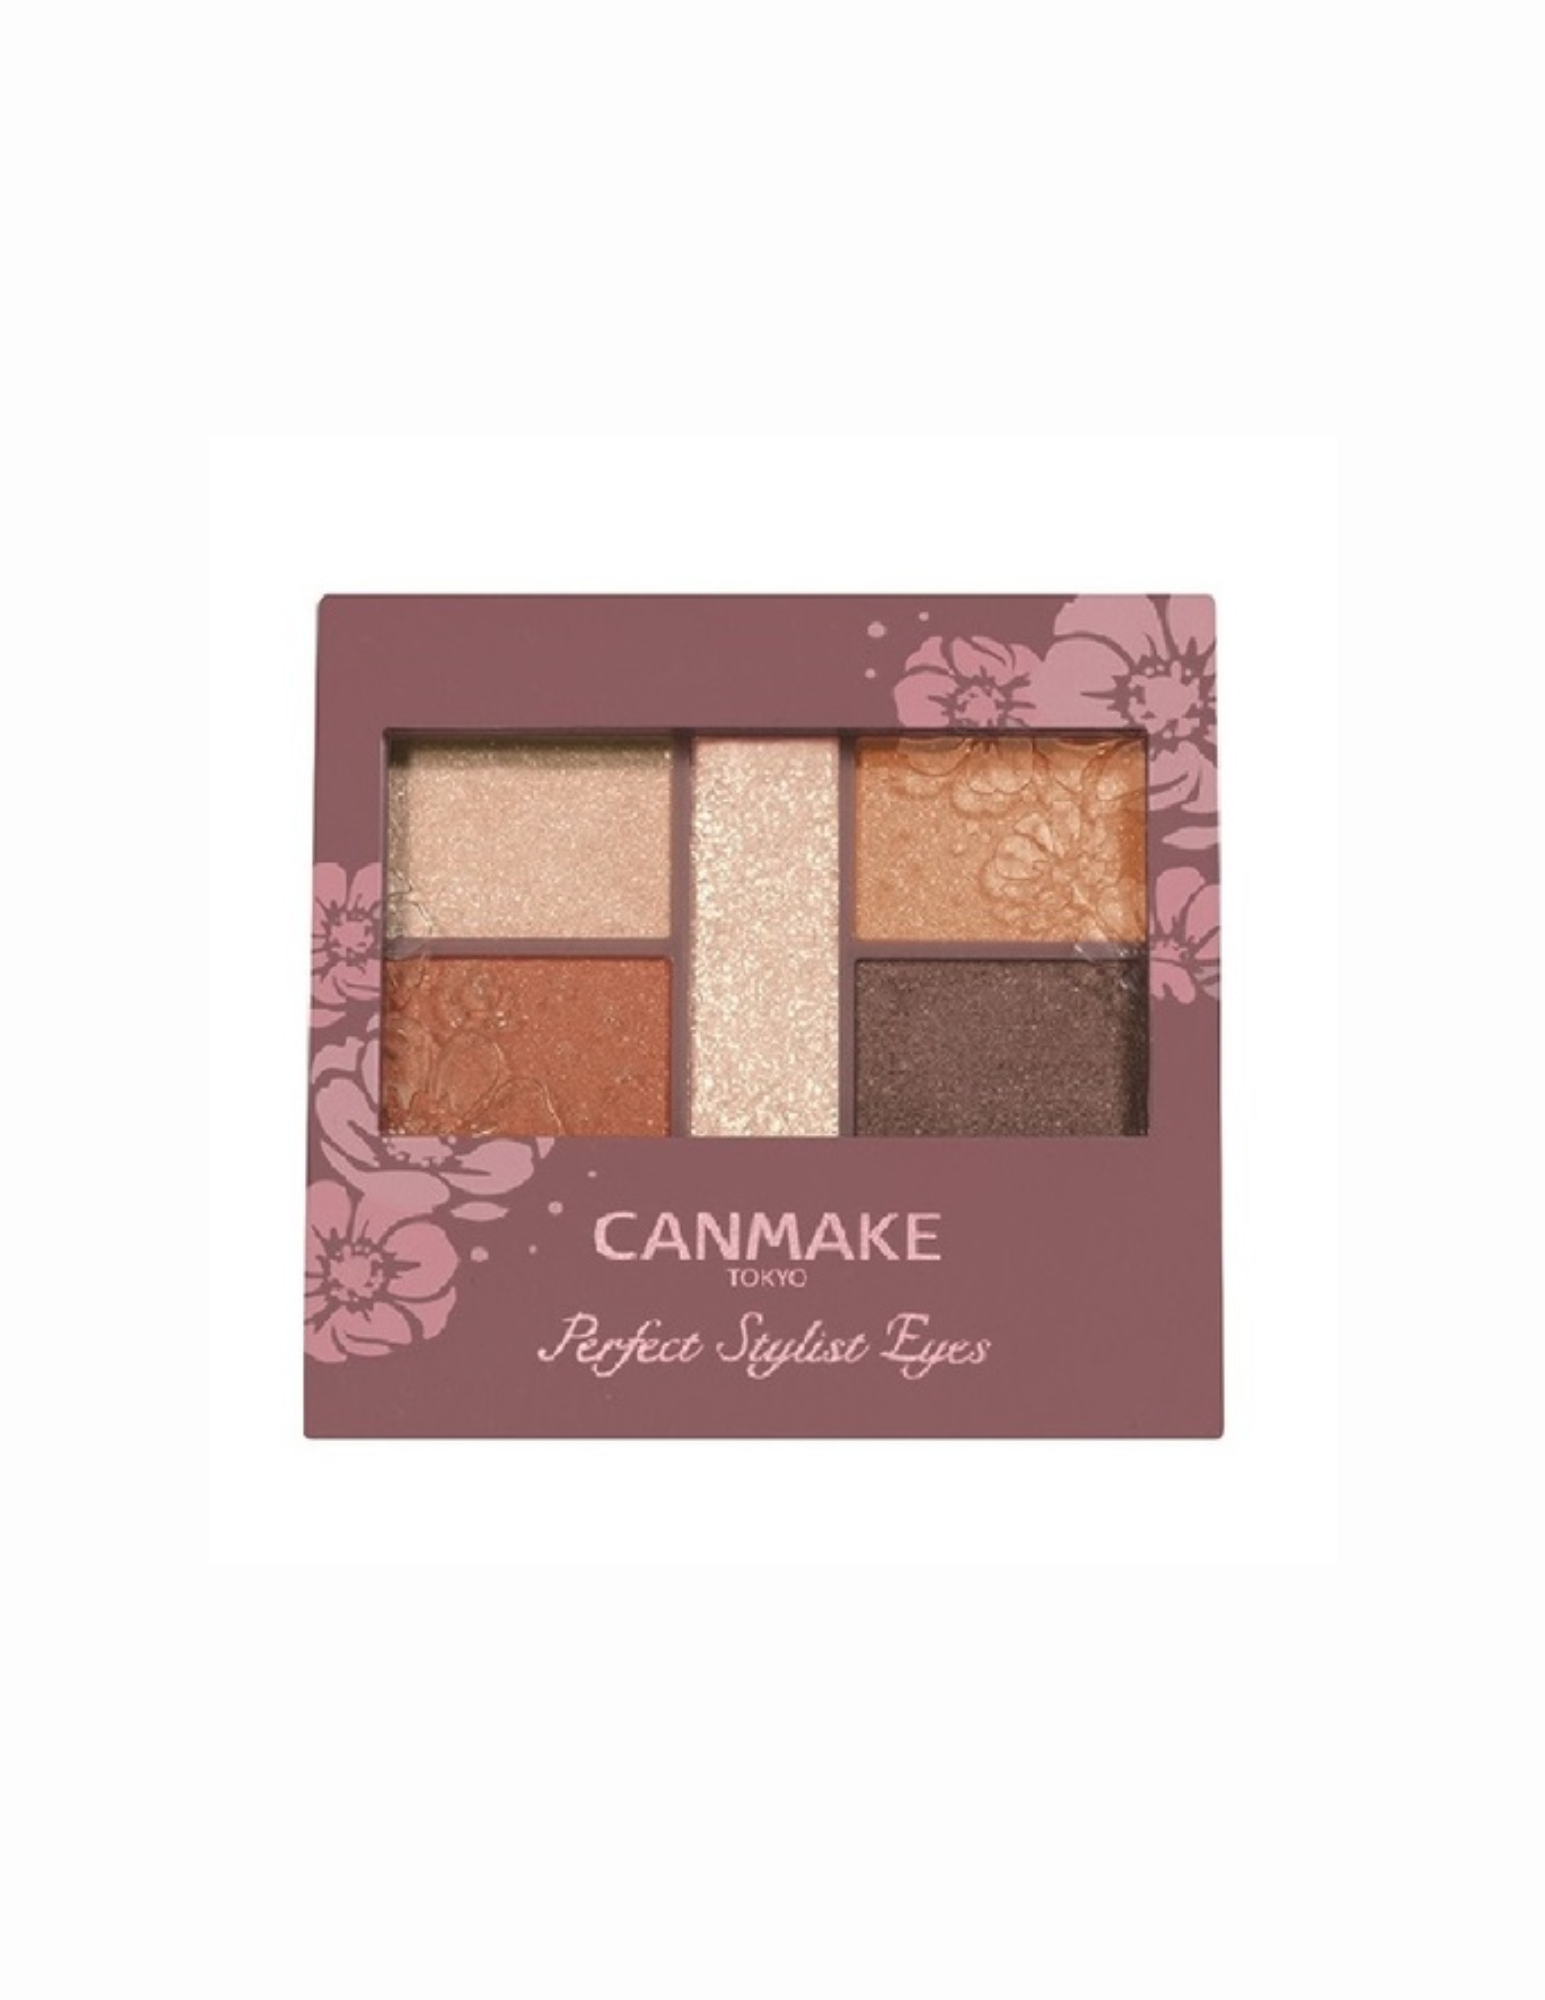 Canmake Perfect Stylist Eyes